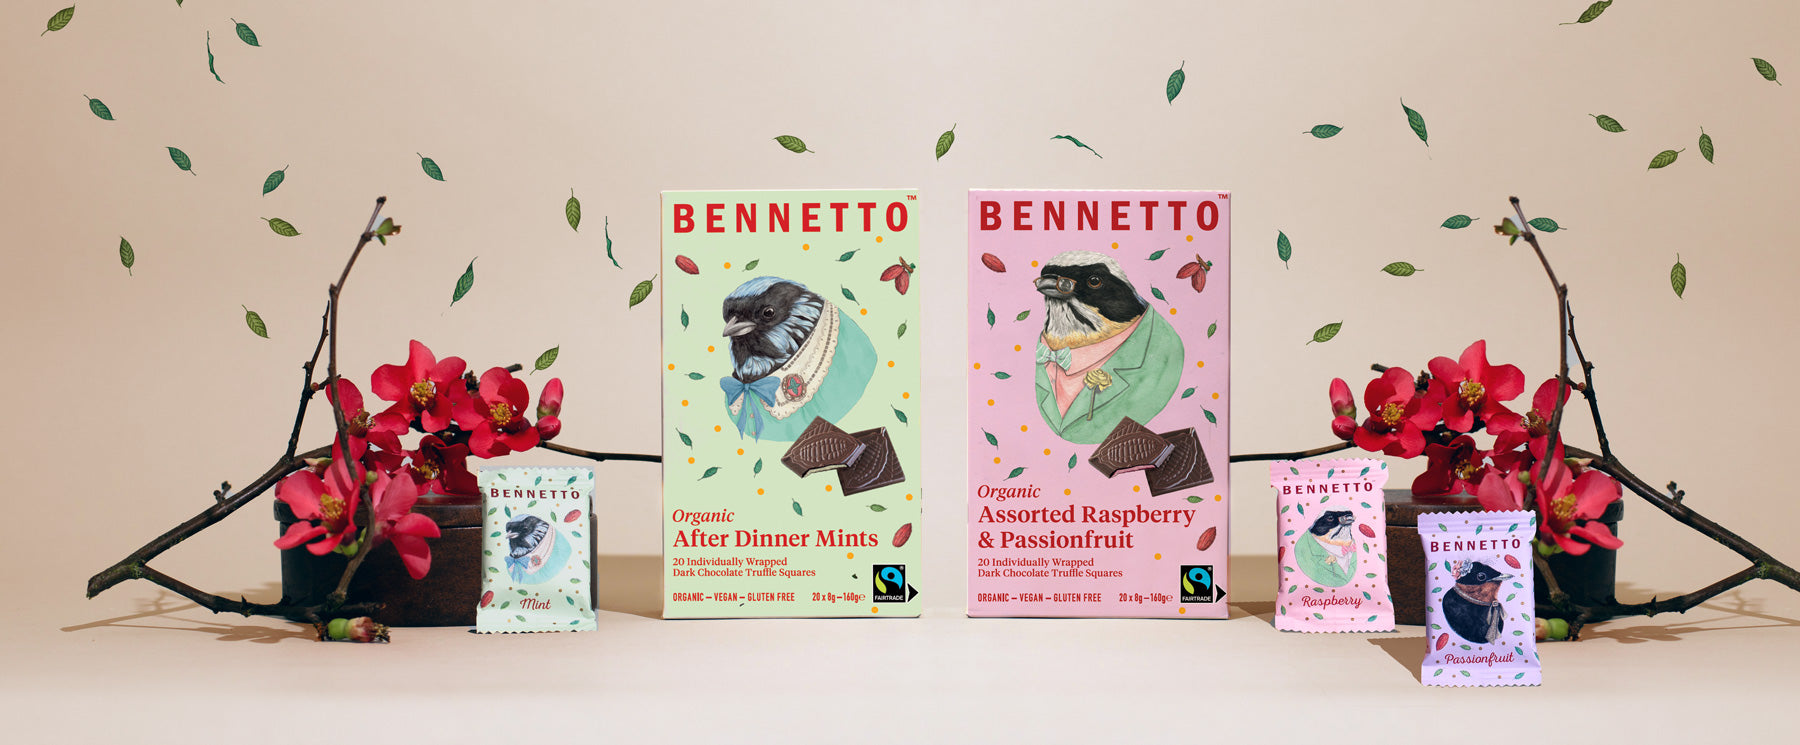 Bennetto 8g Truffle Squares